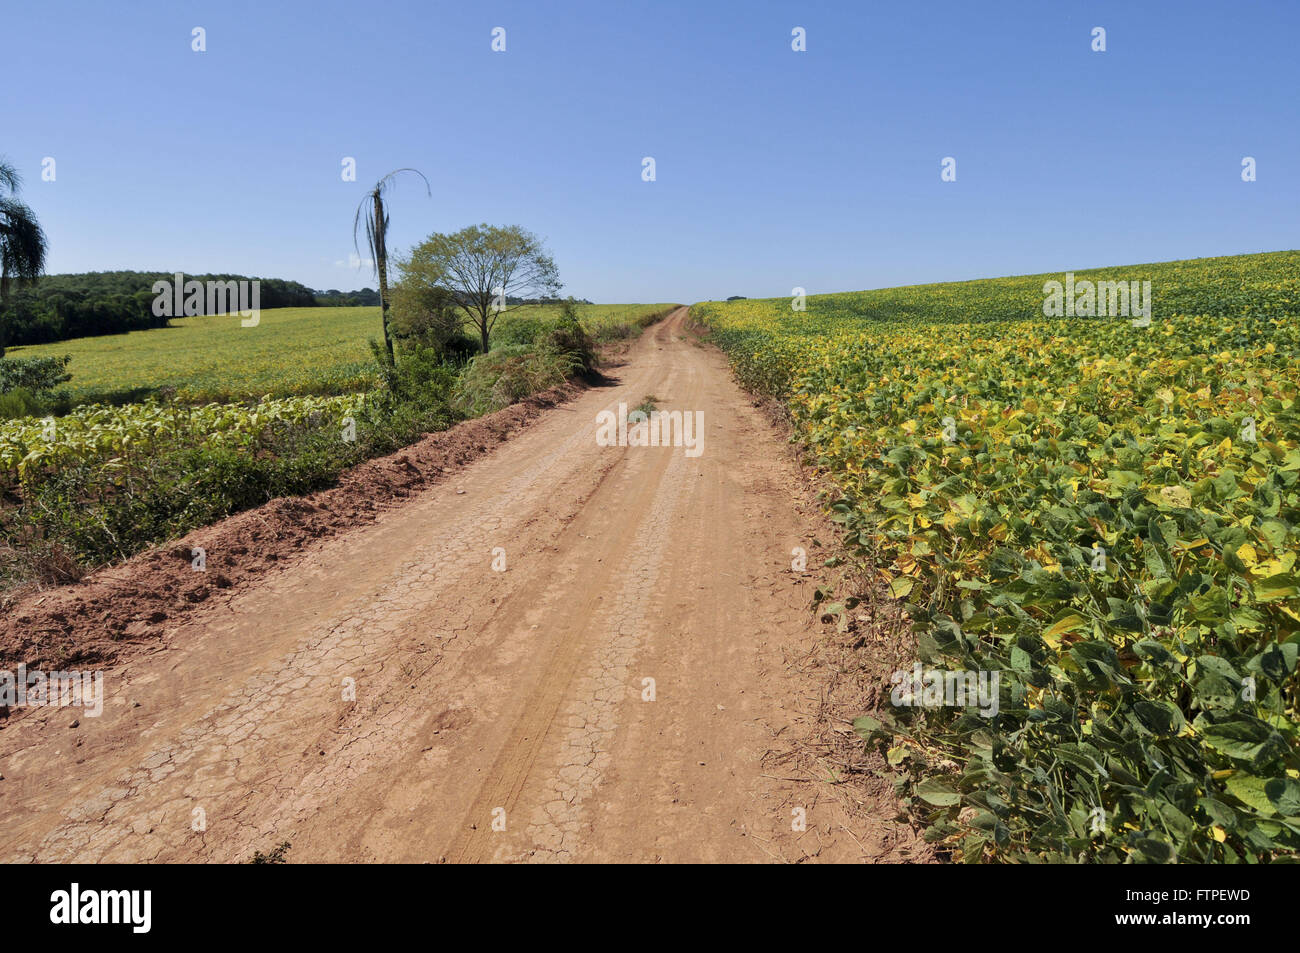 Dirt road and soy plantation in the countryside Stock Photo